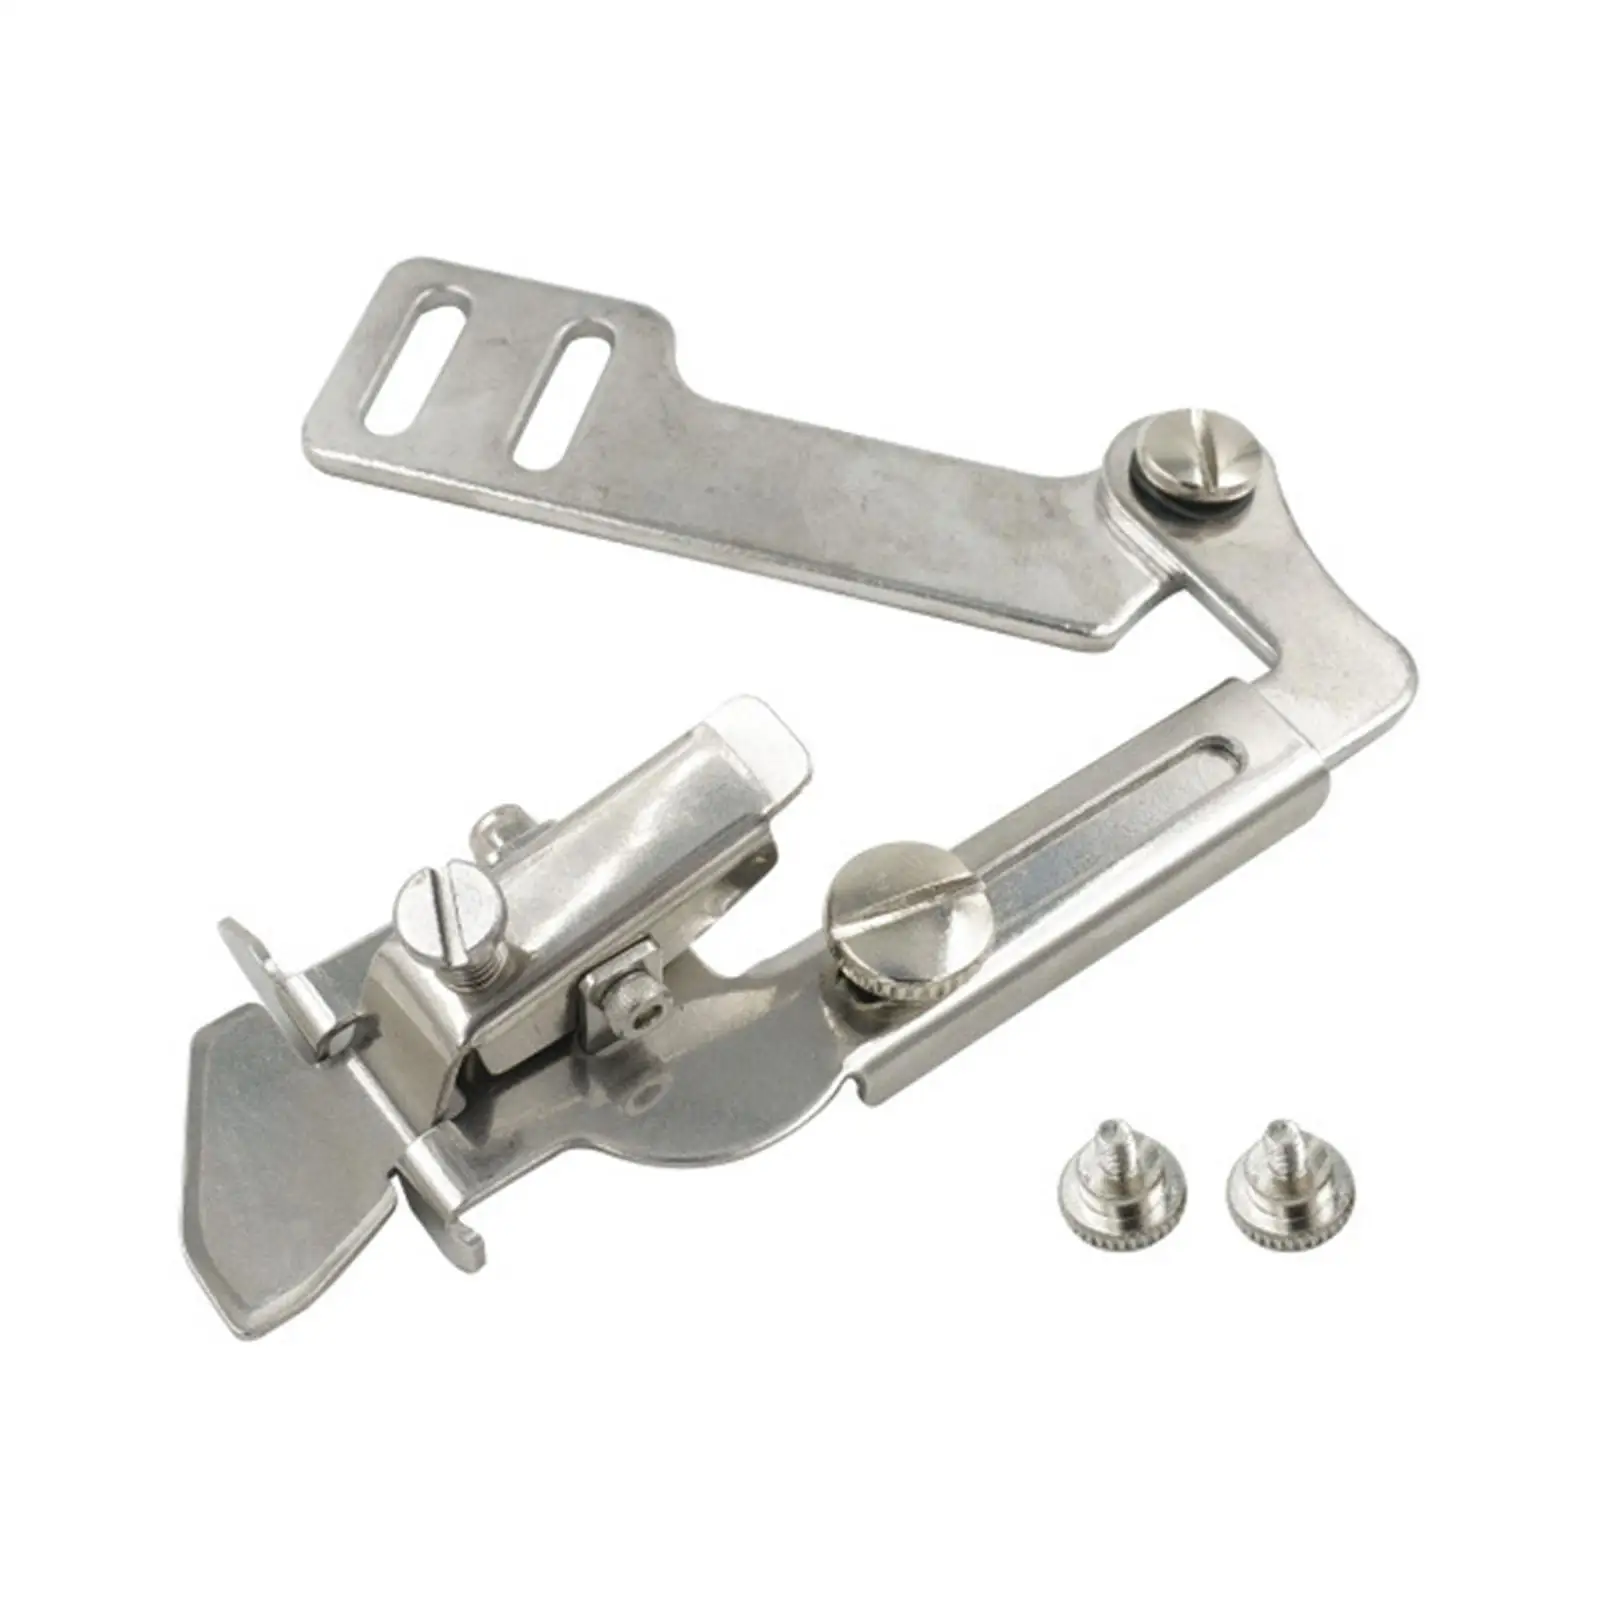 Sewing Machine Presser Foot Household Universal Edge Guide Accessories